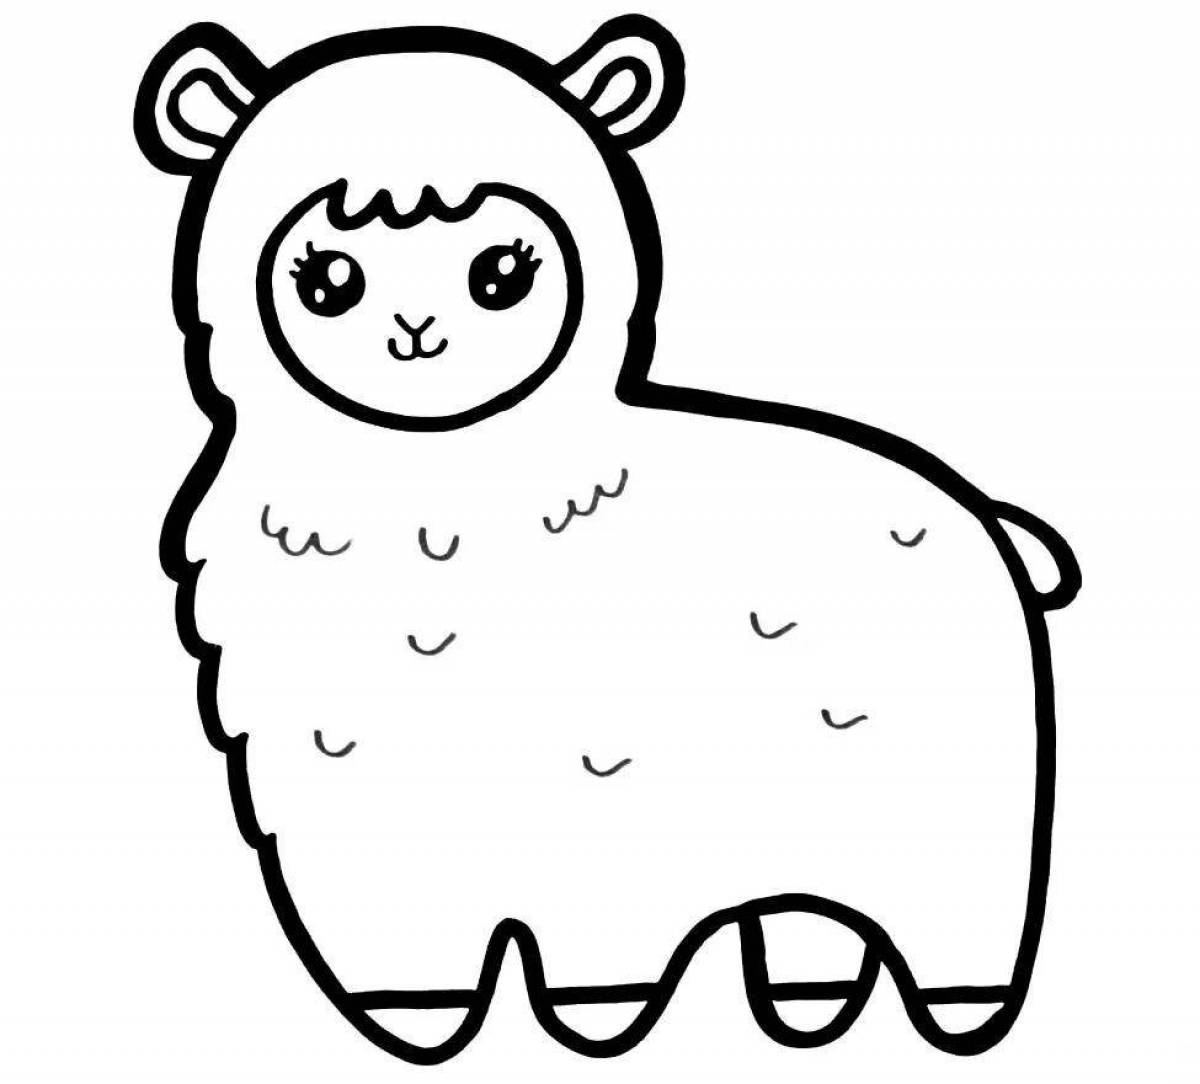 Cute lama coloring pages for kids